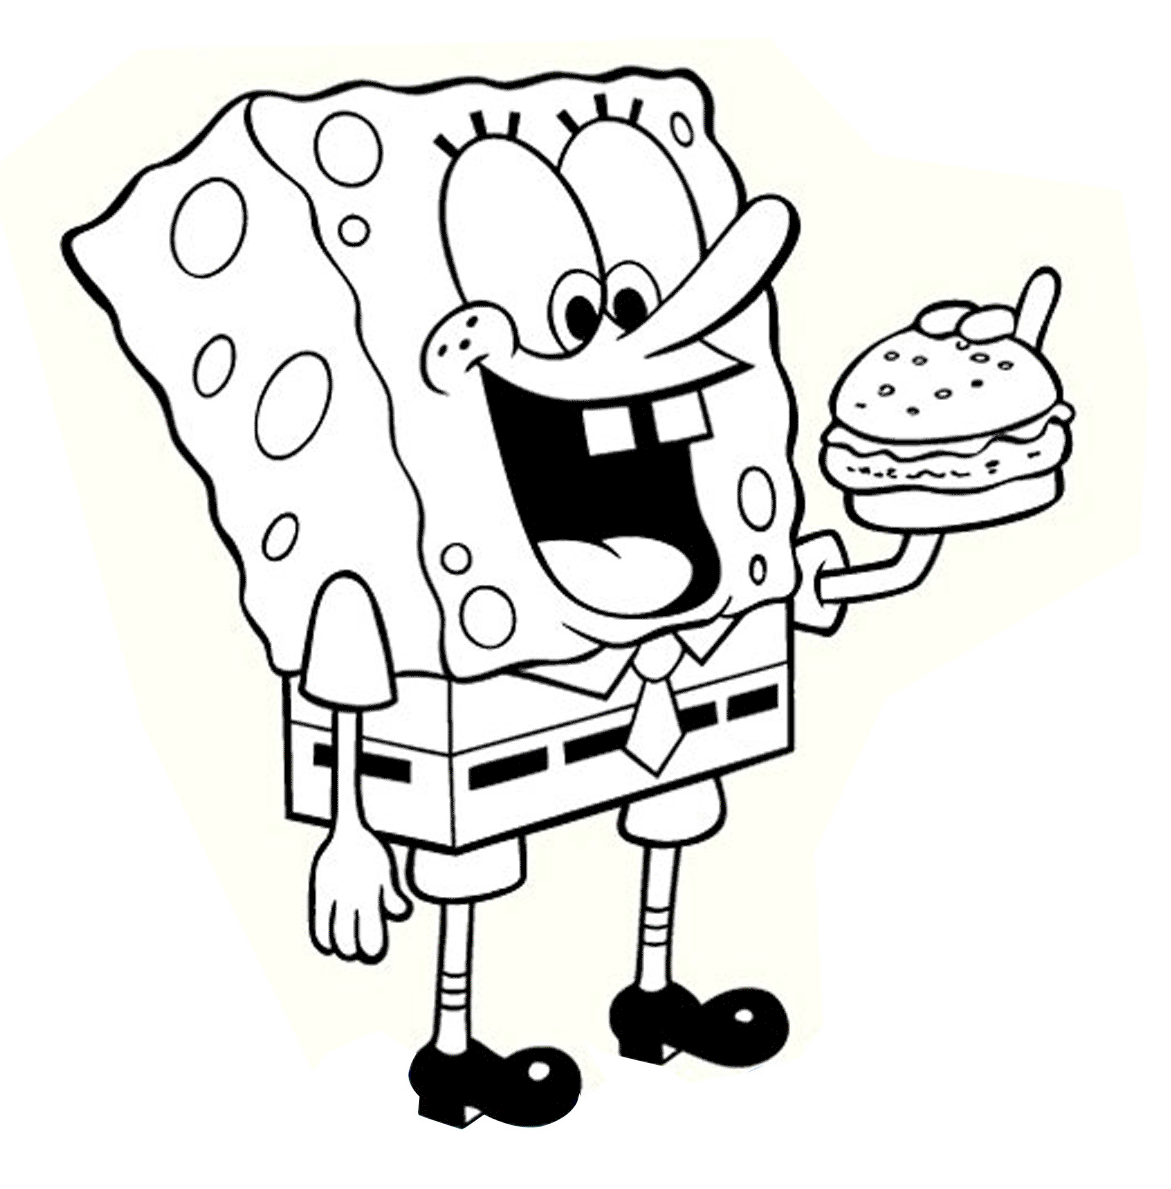 coloring pages of sopngebob - photo #1